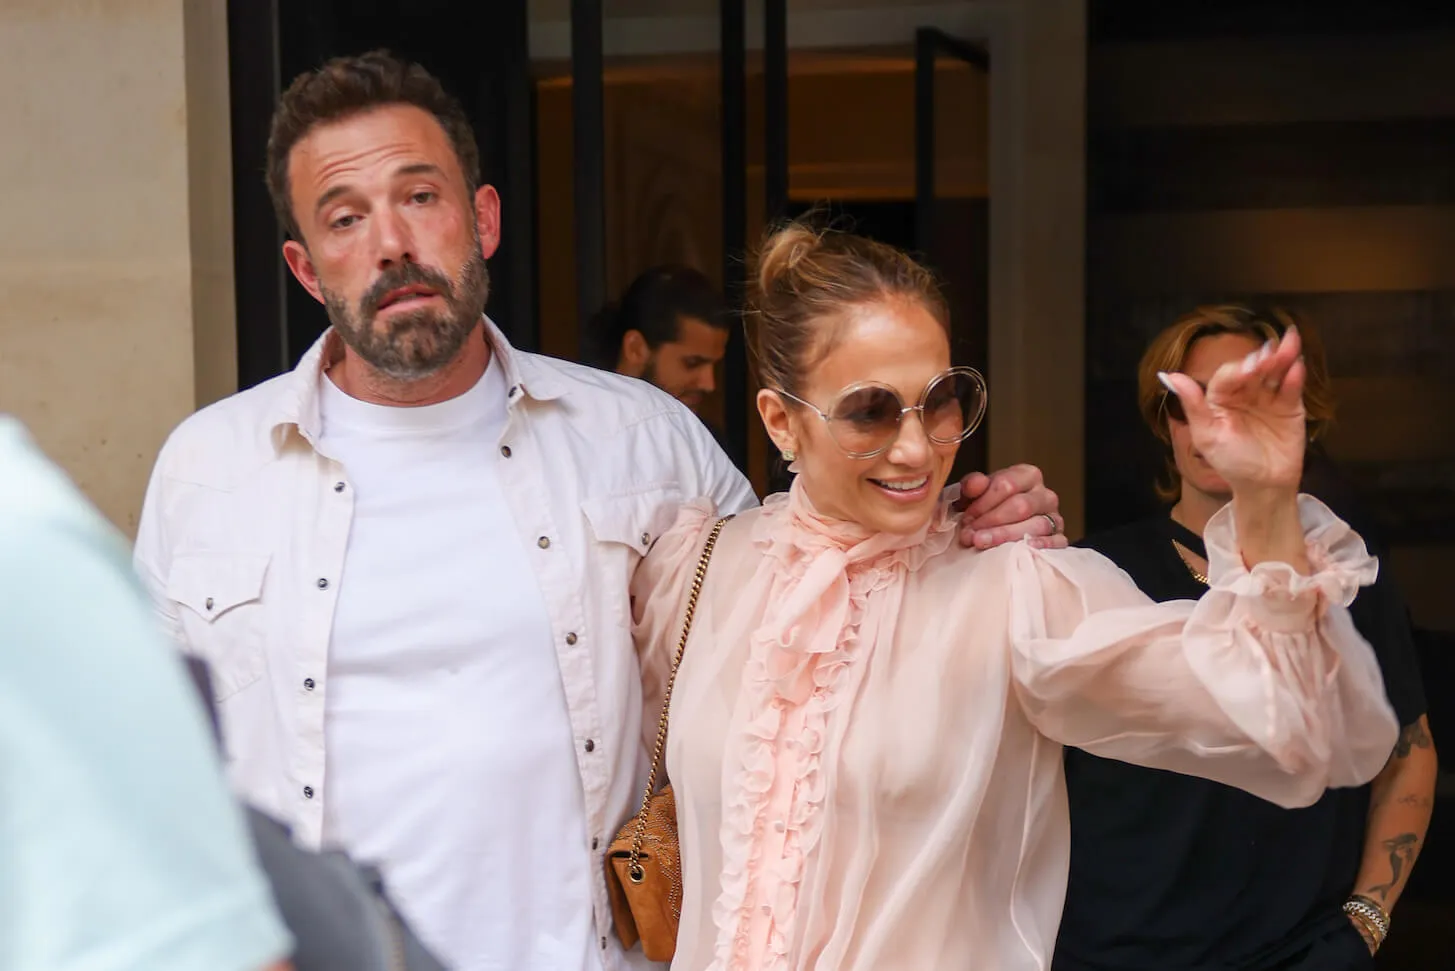 Ben Affleck looking bored as Jennifer Lopez waves and smiles in public in 2022